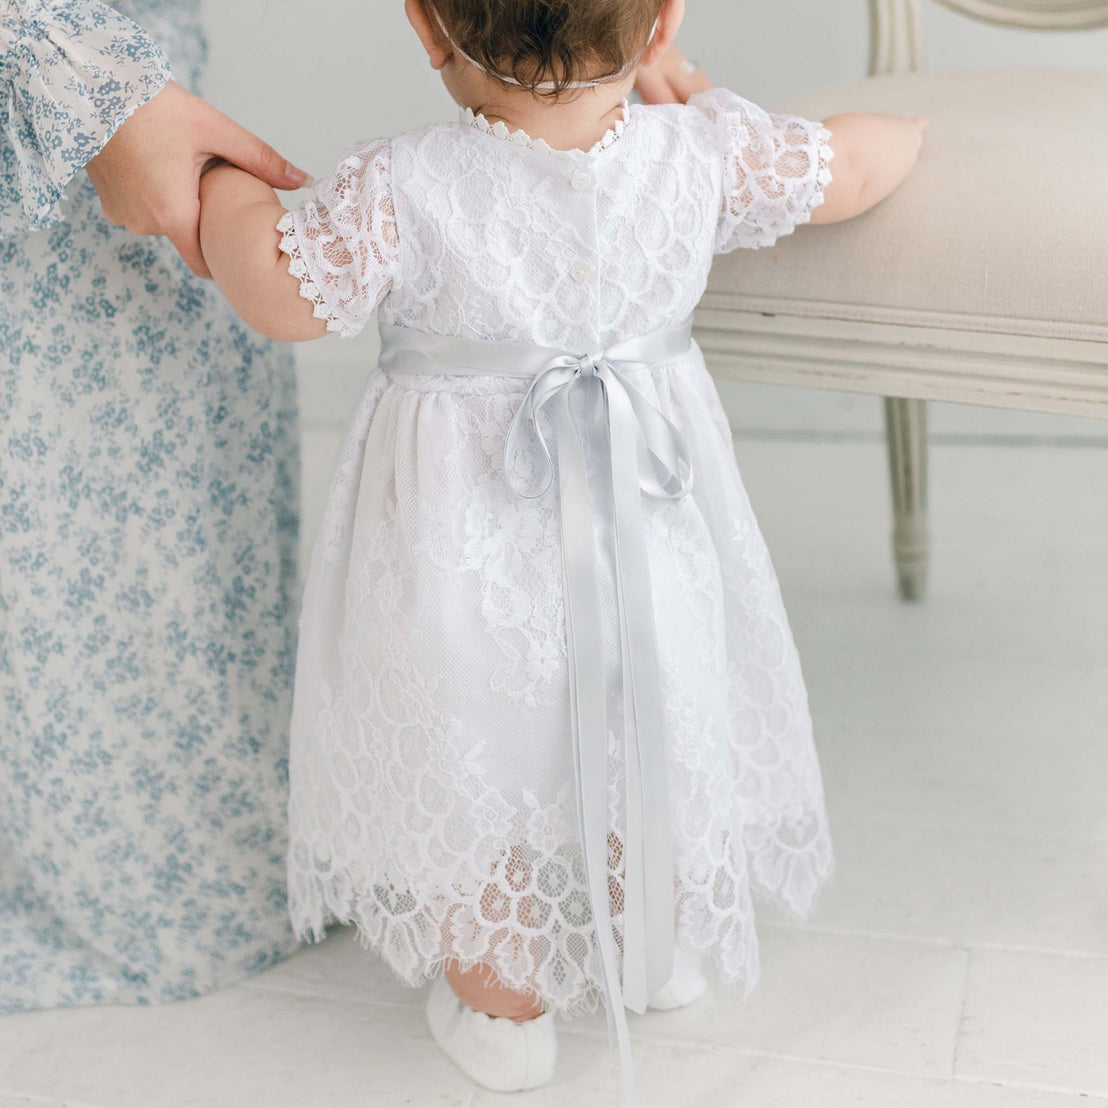 A toddler in an Olivia Dress, learning to stand up with the support of an adult's hands, perfect as a boutique baby gift or for a christening, in a light, airy room